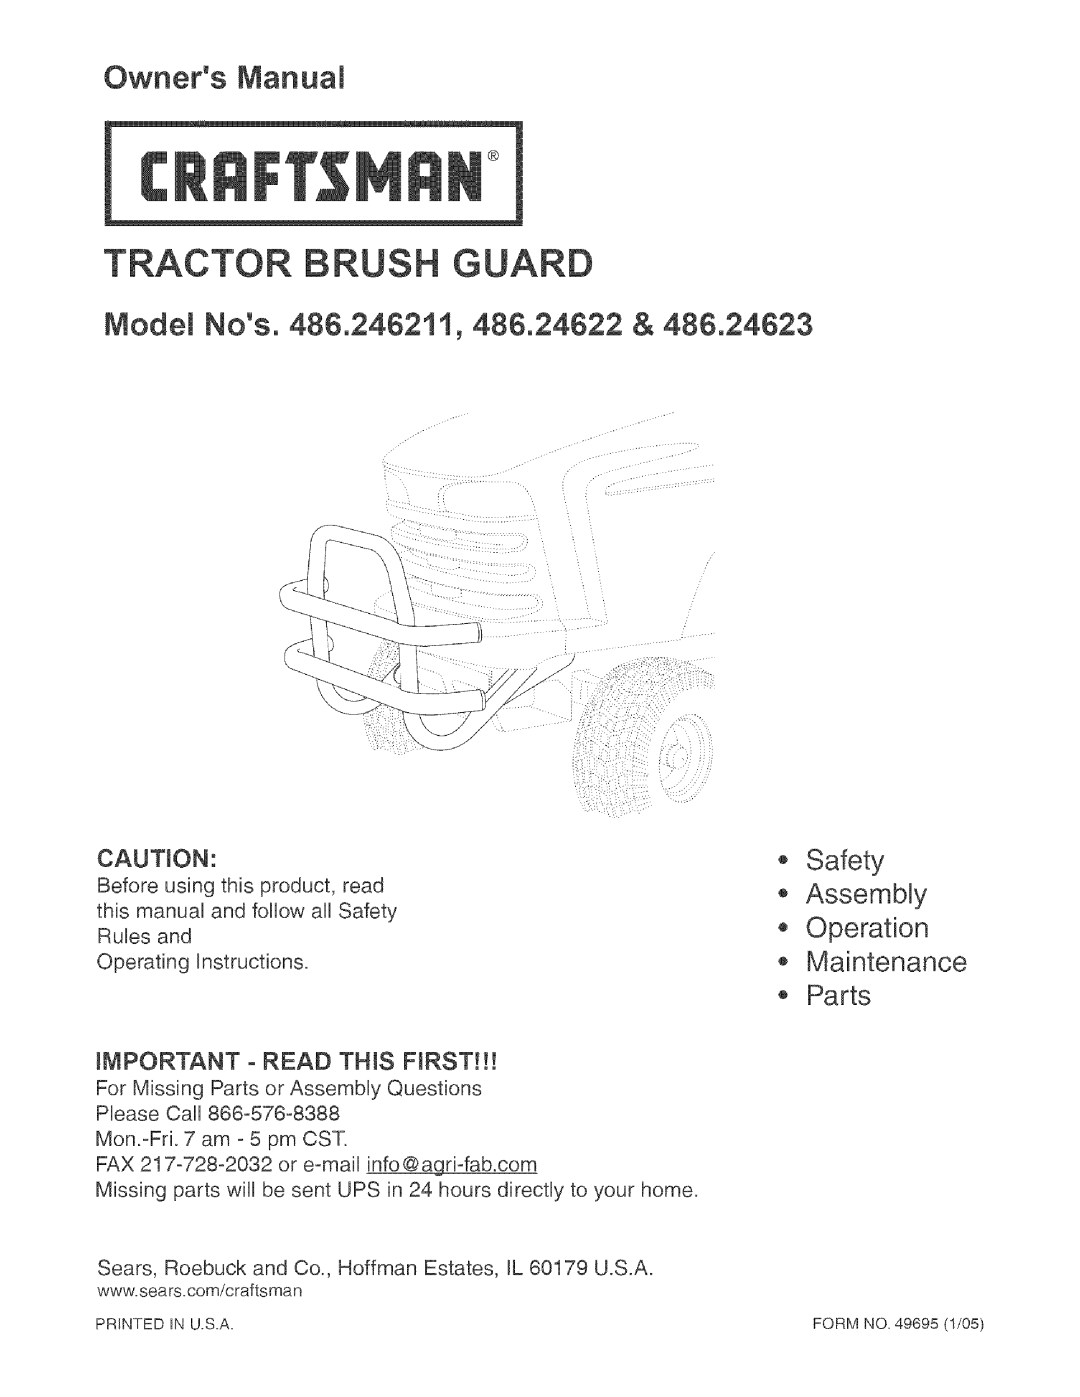 Craftsman 486.24622 owner manual ModeN Nos, Tractor Brush Guard, Safety, AssembLy, Operation, Maintenance, Parts 